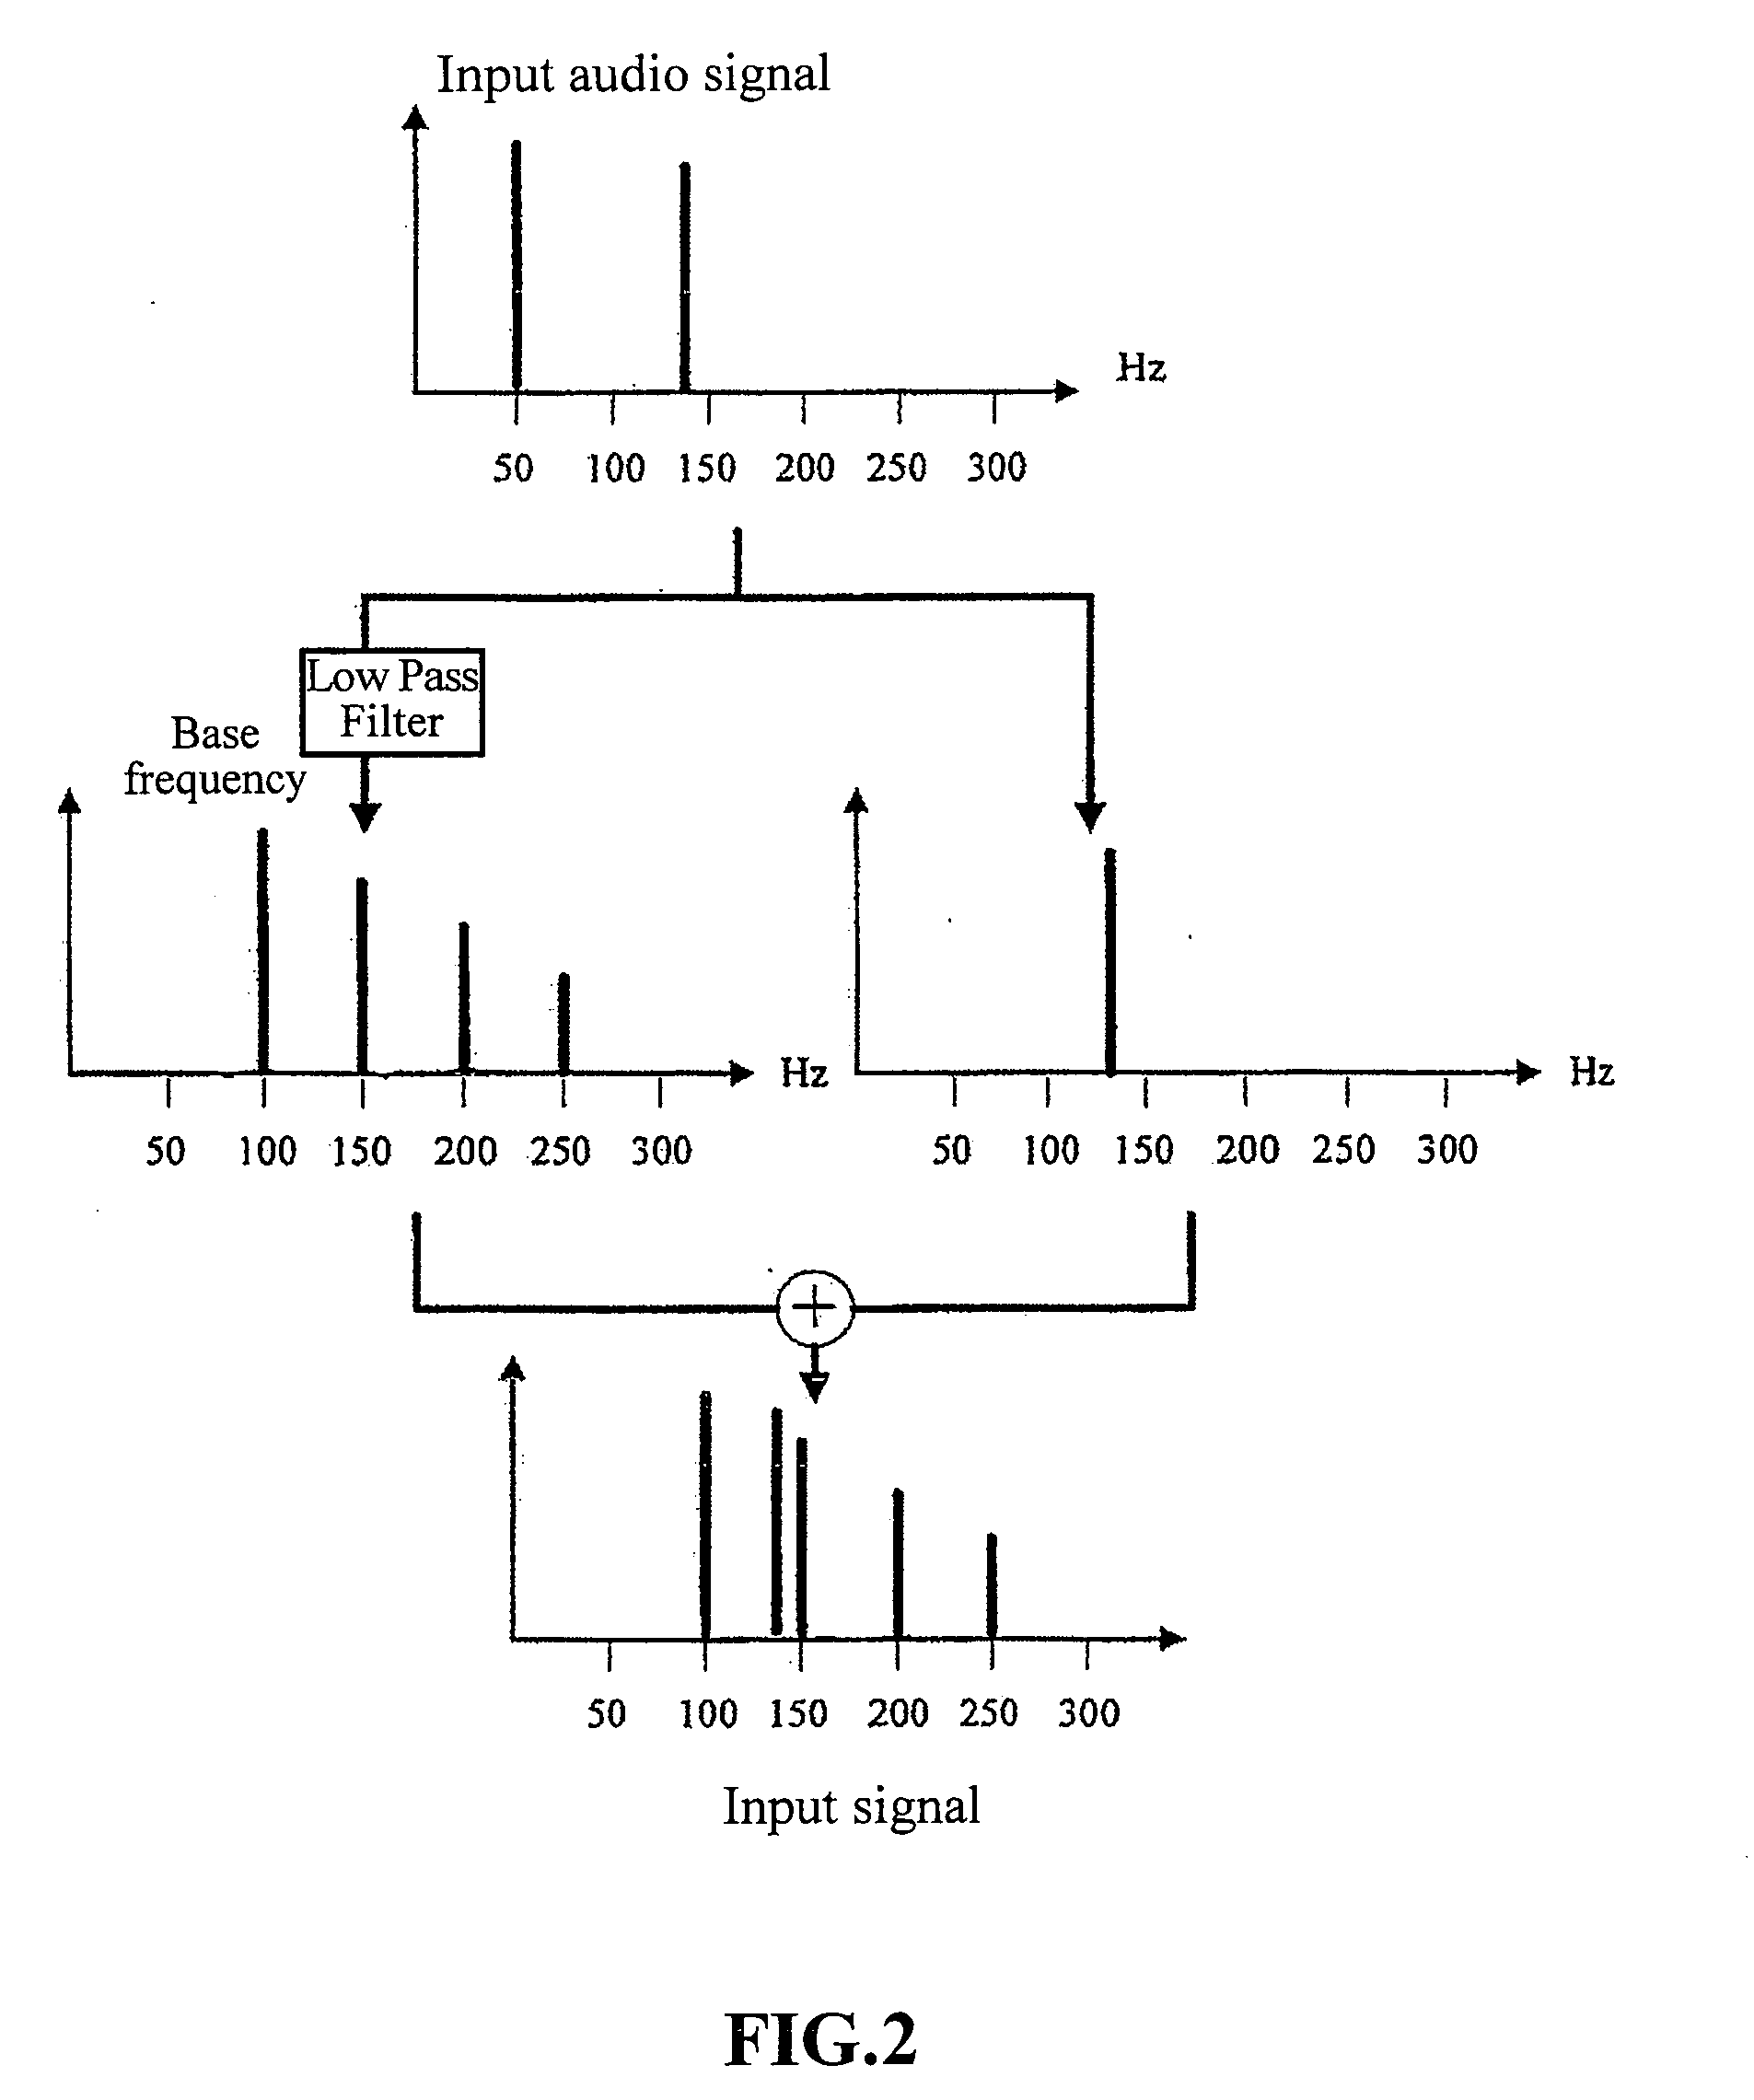 Method for virtual bass synthesis